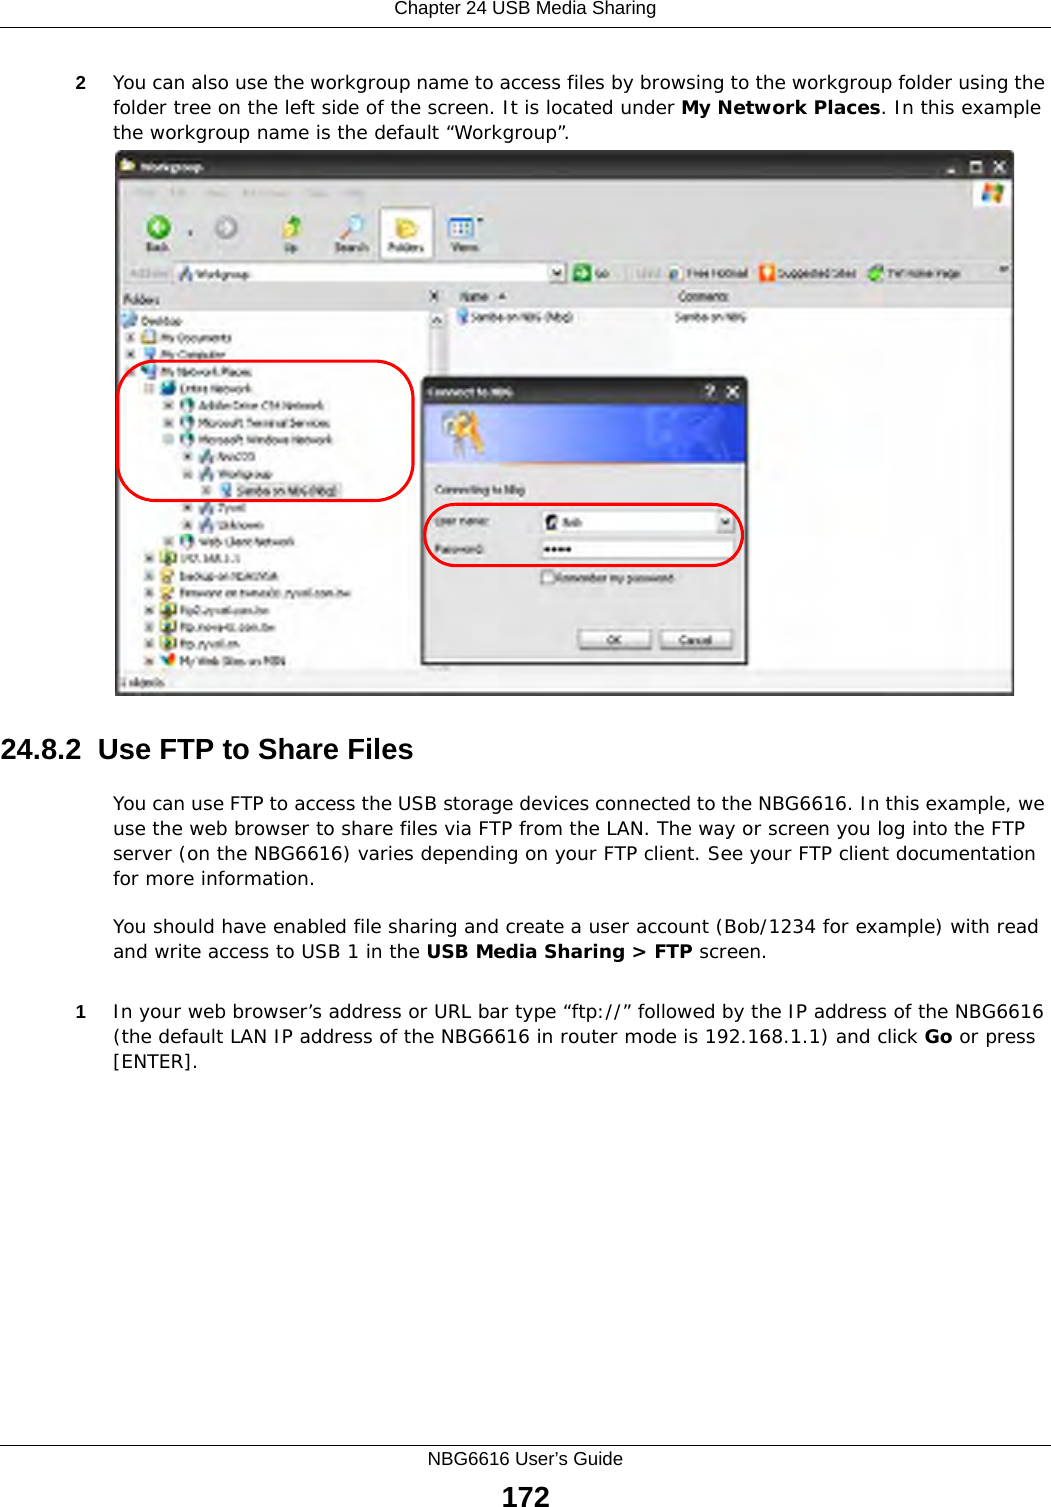 Chapter 24 USB Media SharingNBG6616 User’s Guide1722You can also use the workgroup name to access files by browsing to the workgroup folder using the folder tree on the left side of the screen. It is located under My Network Places. In this example the workgroup name is the default “Workgroup”. 24.8.2  Use FTP to Share FilesYou can use FTP to access the USB storage devices connected to the NBG6616. In this example, we use the web browser to share files via FTP from the LAN. The way or screen you log into the FTP server (on the NBG6616) varies depending on your FTP client. See your FTP client documentation for more information. You should have enabled file sharing and create a user account (Bob/1234 for example) with read and write access to USB 1 in the USB Media Sharing &gt; FTP screen.1In your web browser’s address or URL bar type “ftp://” followed by the IP address of the NBG6616 (the default LAN IP address of the NBG6616 in router mode is 192.168.1.1) and click Go or press [ENTER].